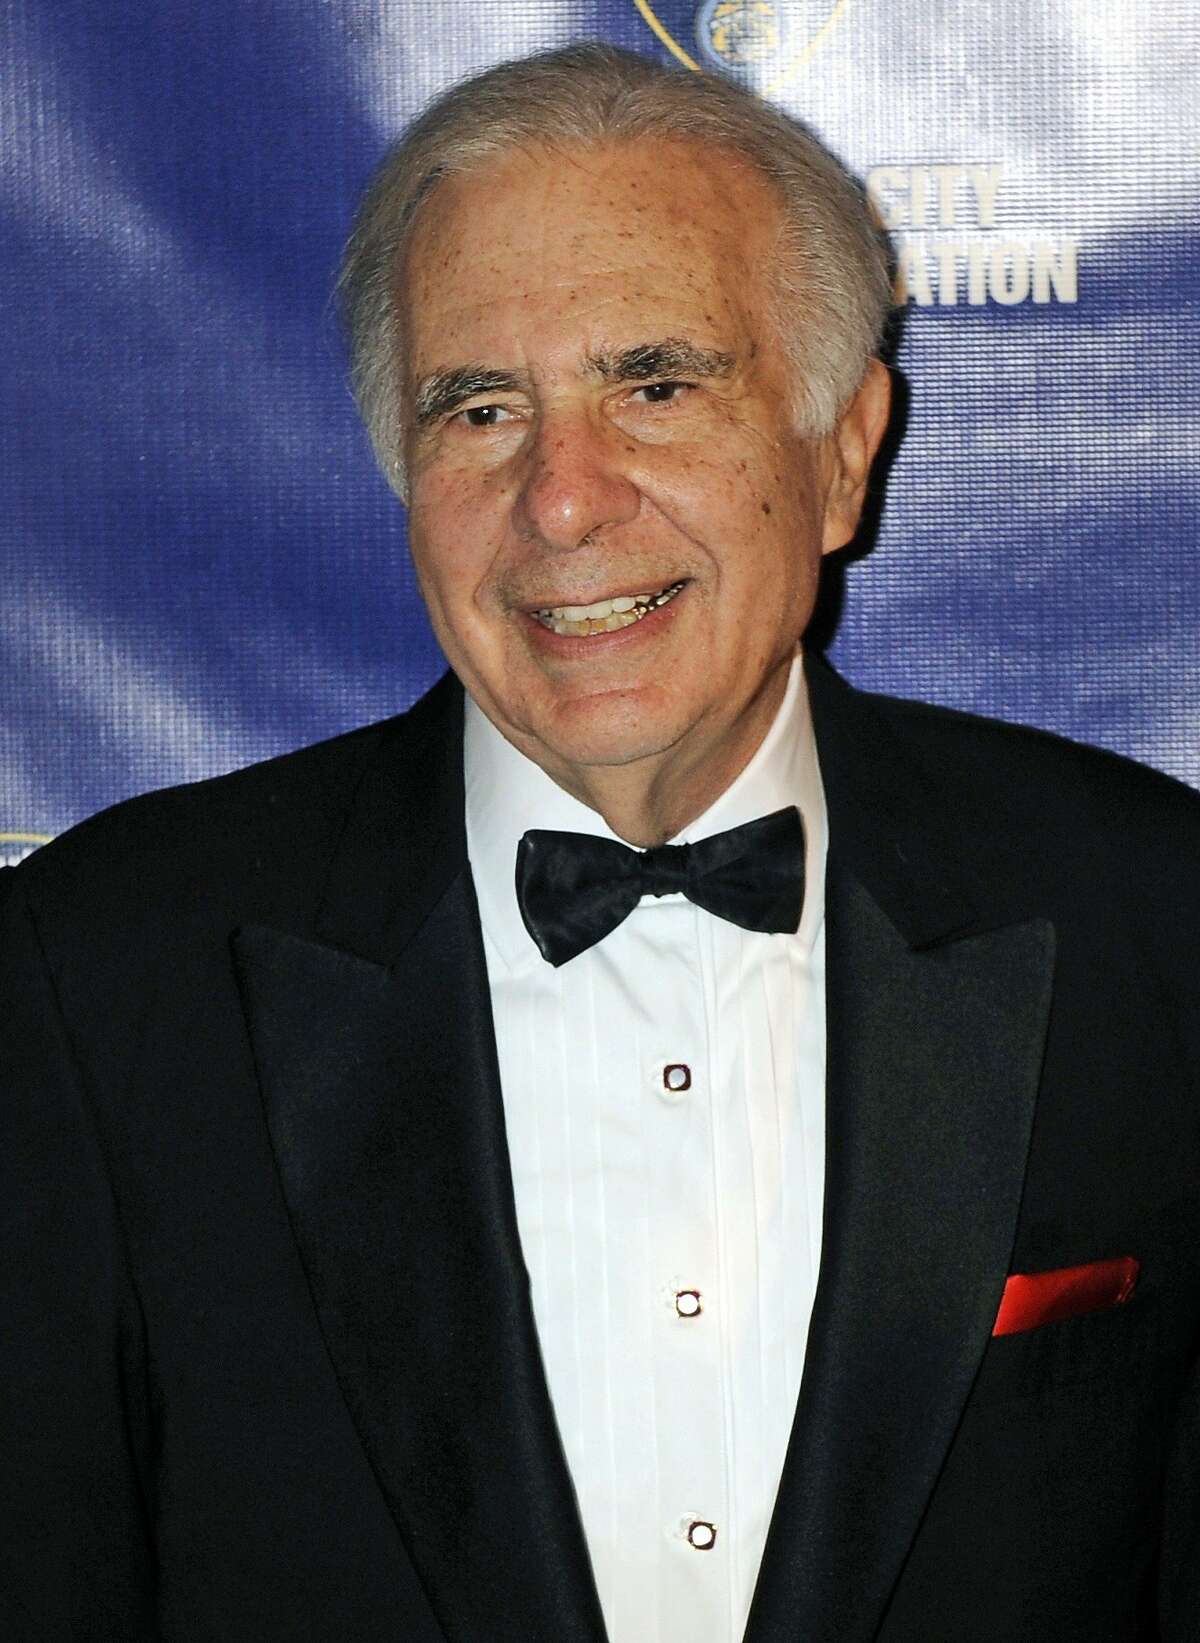 FILE - In this March 16, 2010 file photo, financier Carl Icahn poses for photos upon arriving for the 32nd annual New York City Police Foundation Gala in New York. In a letter sent to American International Group Inc. and posted on his website on Wednesday, Oct. 28, 2015, Icahn urged the company to split up into smaller companies, saying that the insurance provider is "too big to succeed." (AP Photo/Henny Ray Abrams, File)